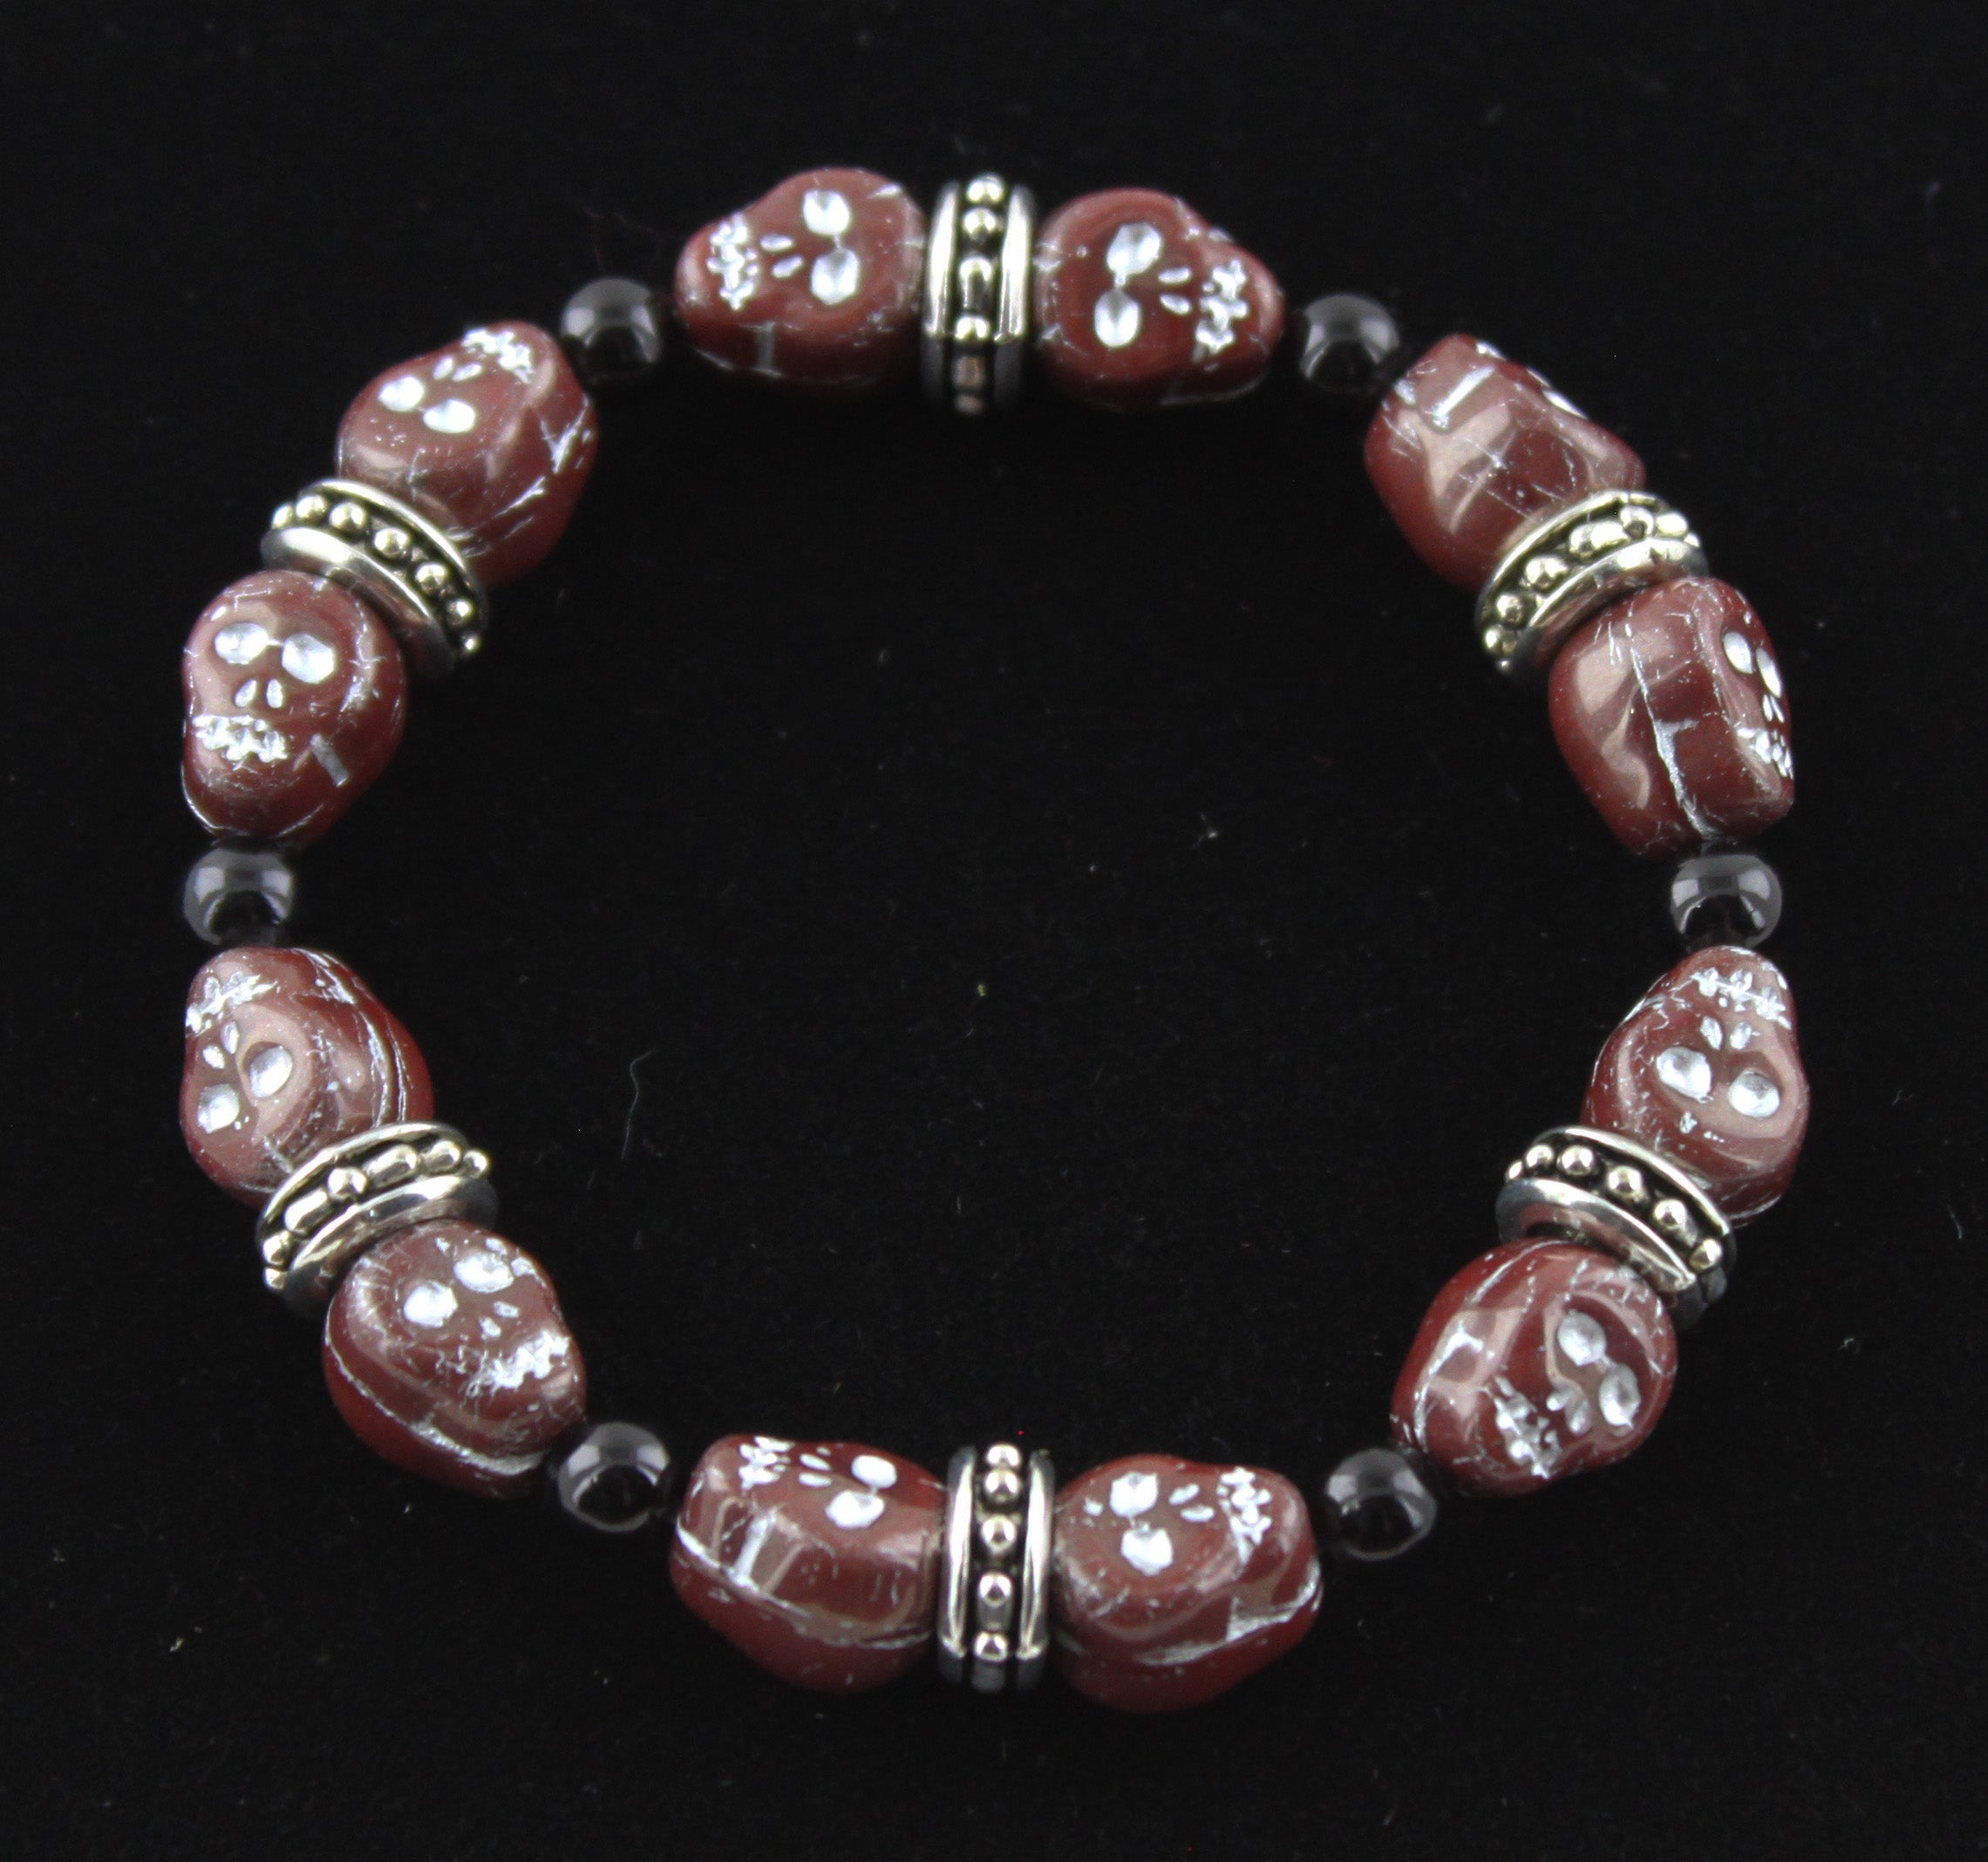 Deep Red & Black Skull Bracelet with Silver Accents